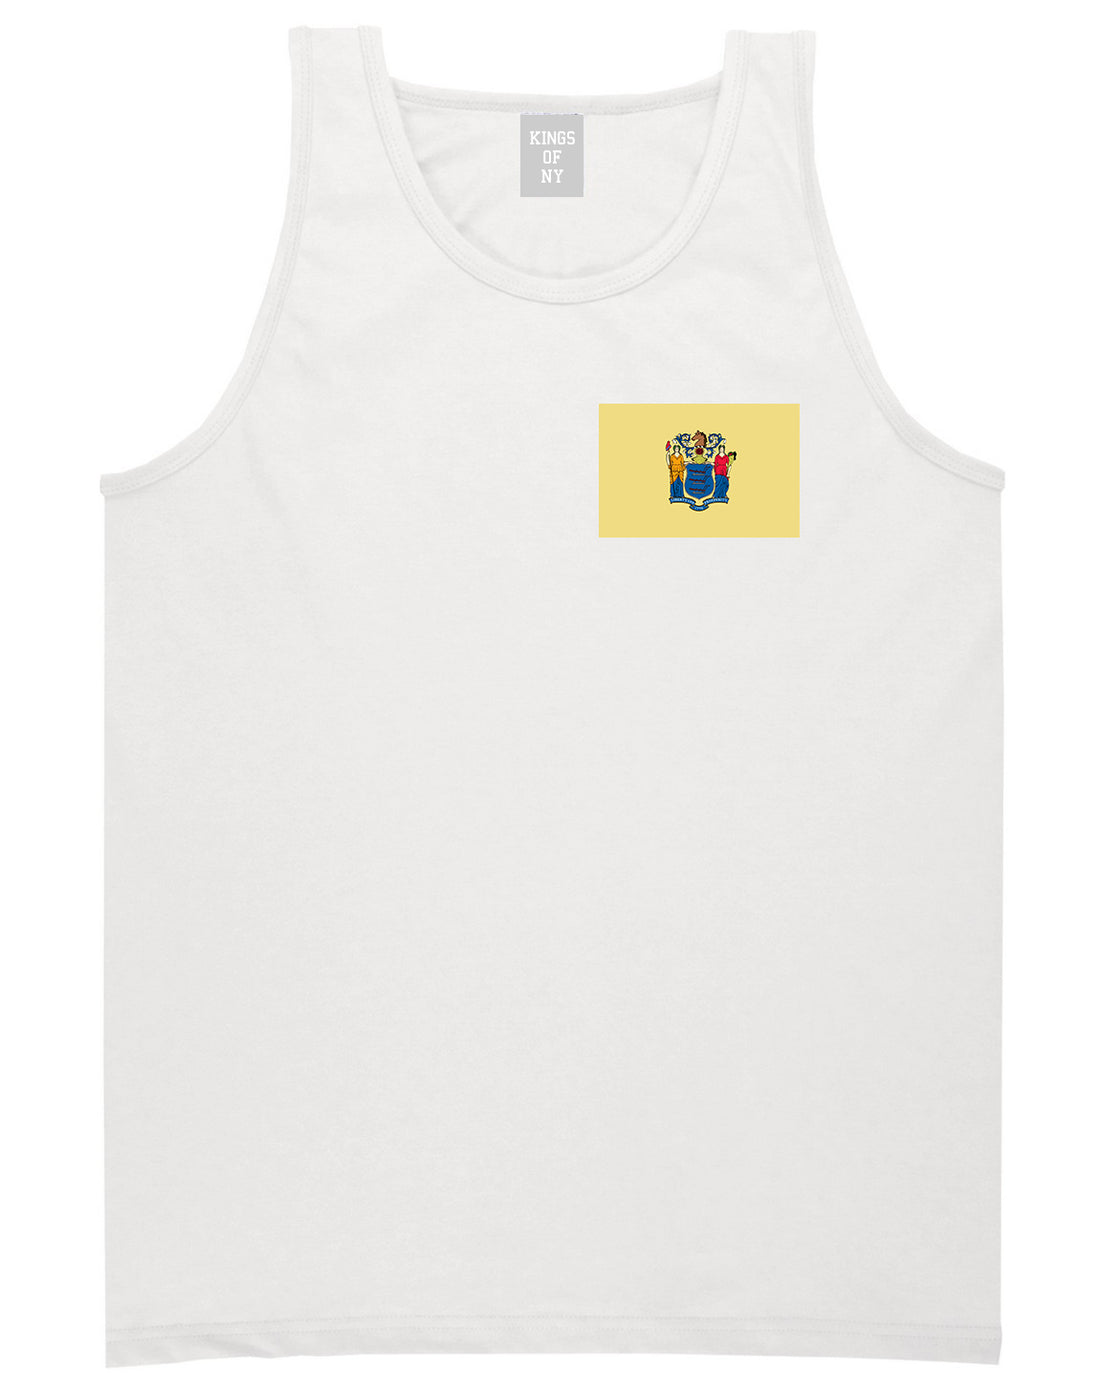 New Jersey State Flag NJ Chest Mens Tank Top T-Shirt White